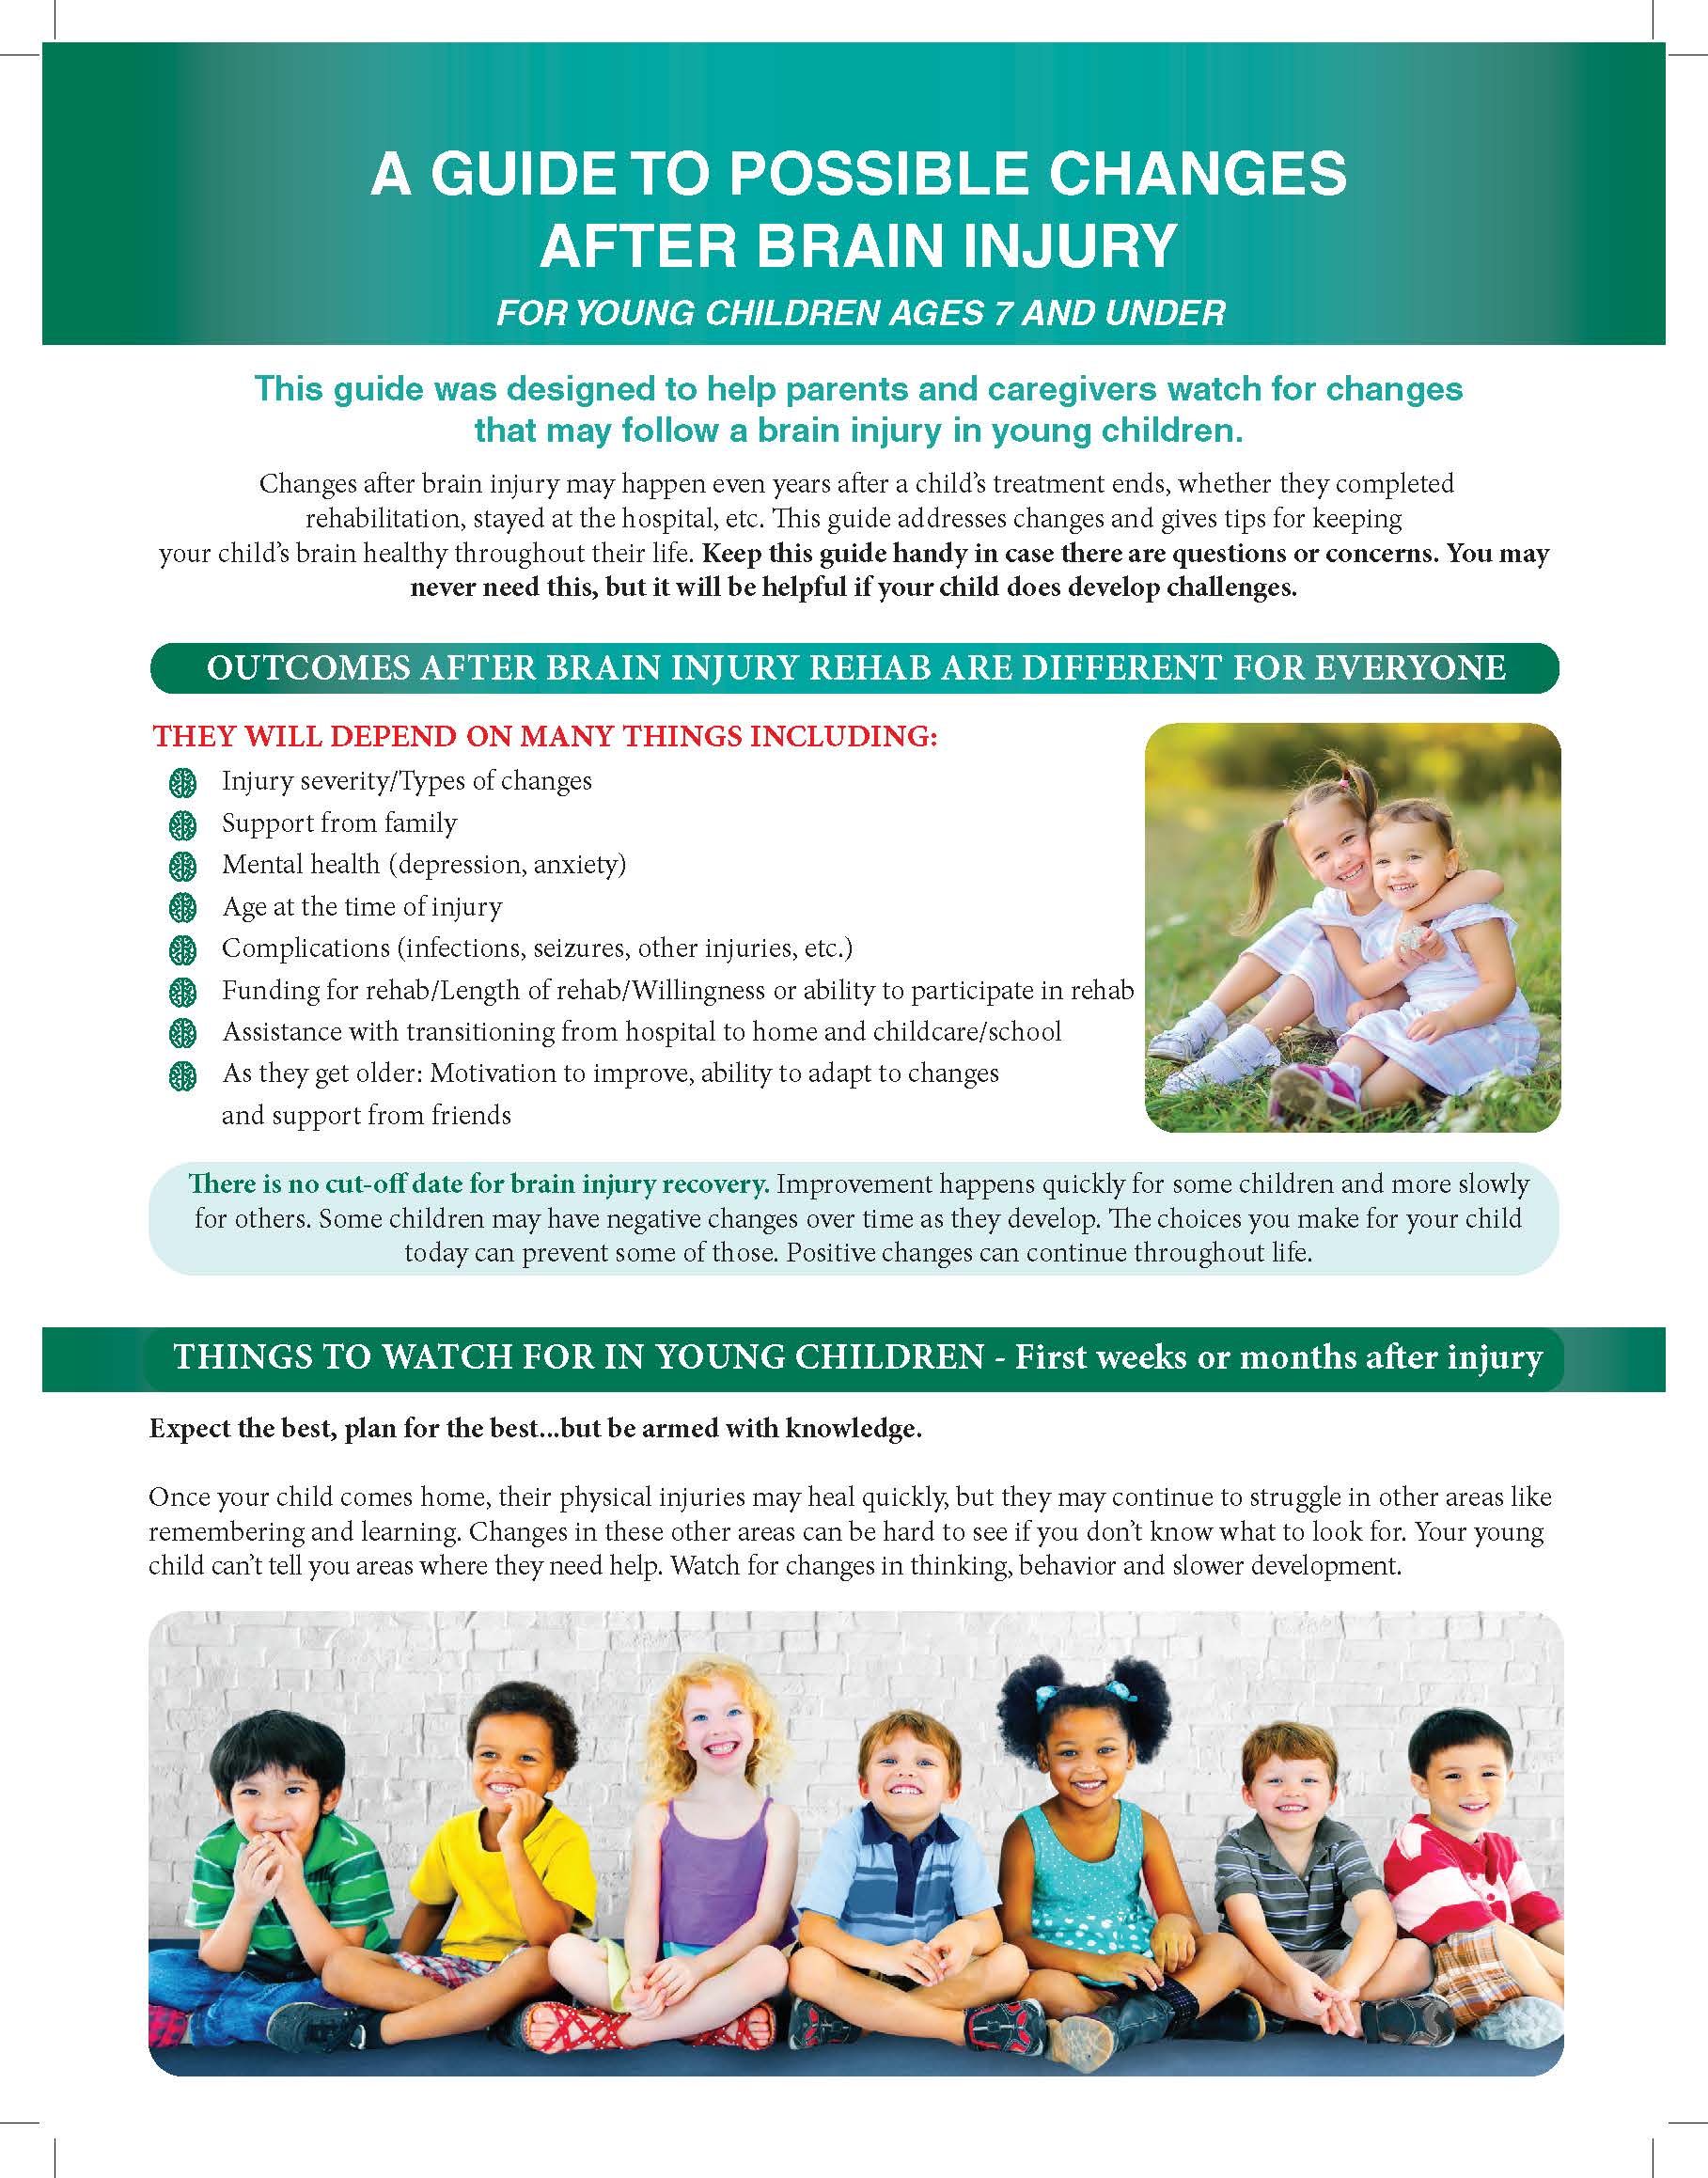 A Guide To Possible Changes After Brain Injury: in Young Children